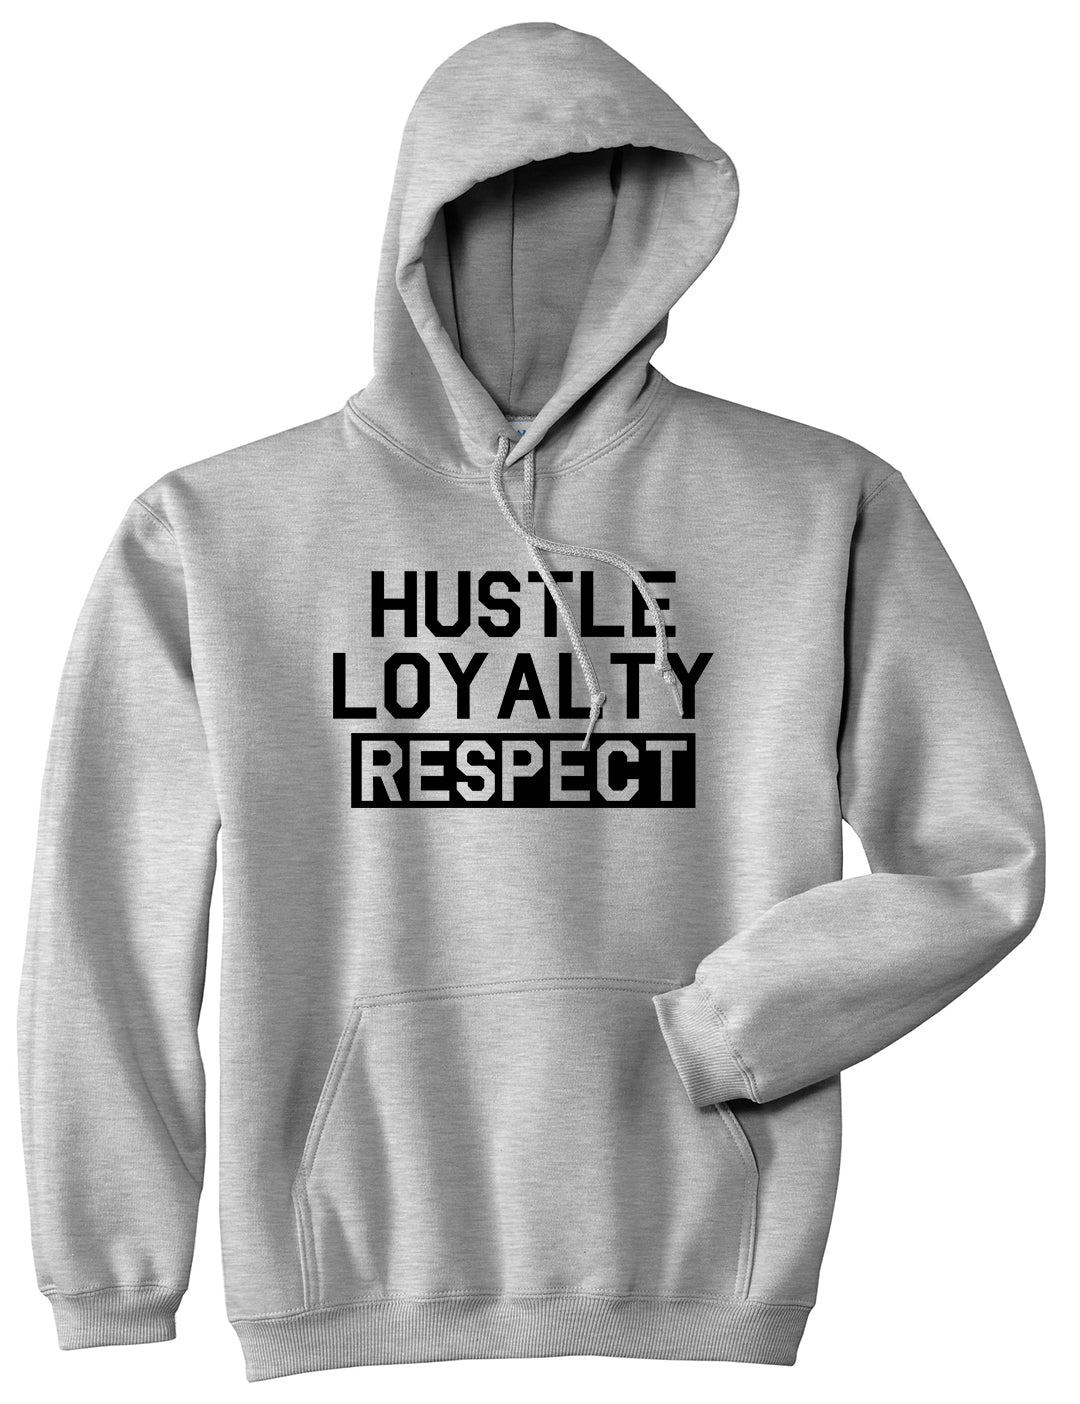 Hustle Loyalty Respect Mens Pullover Hoodie Grey by Kings Of NY